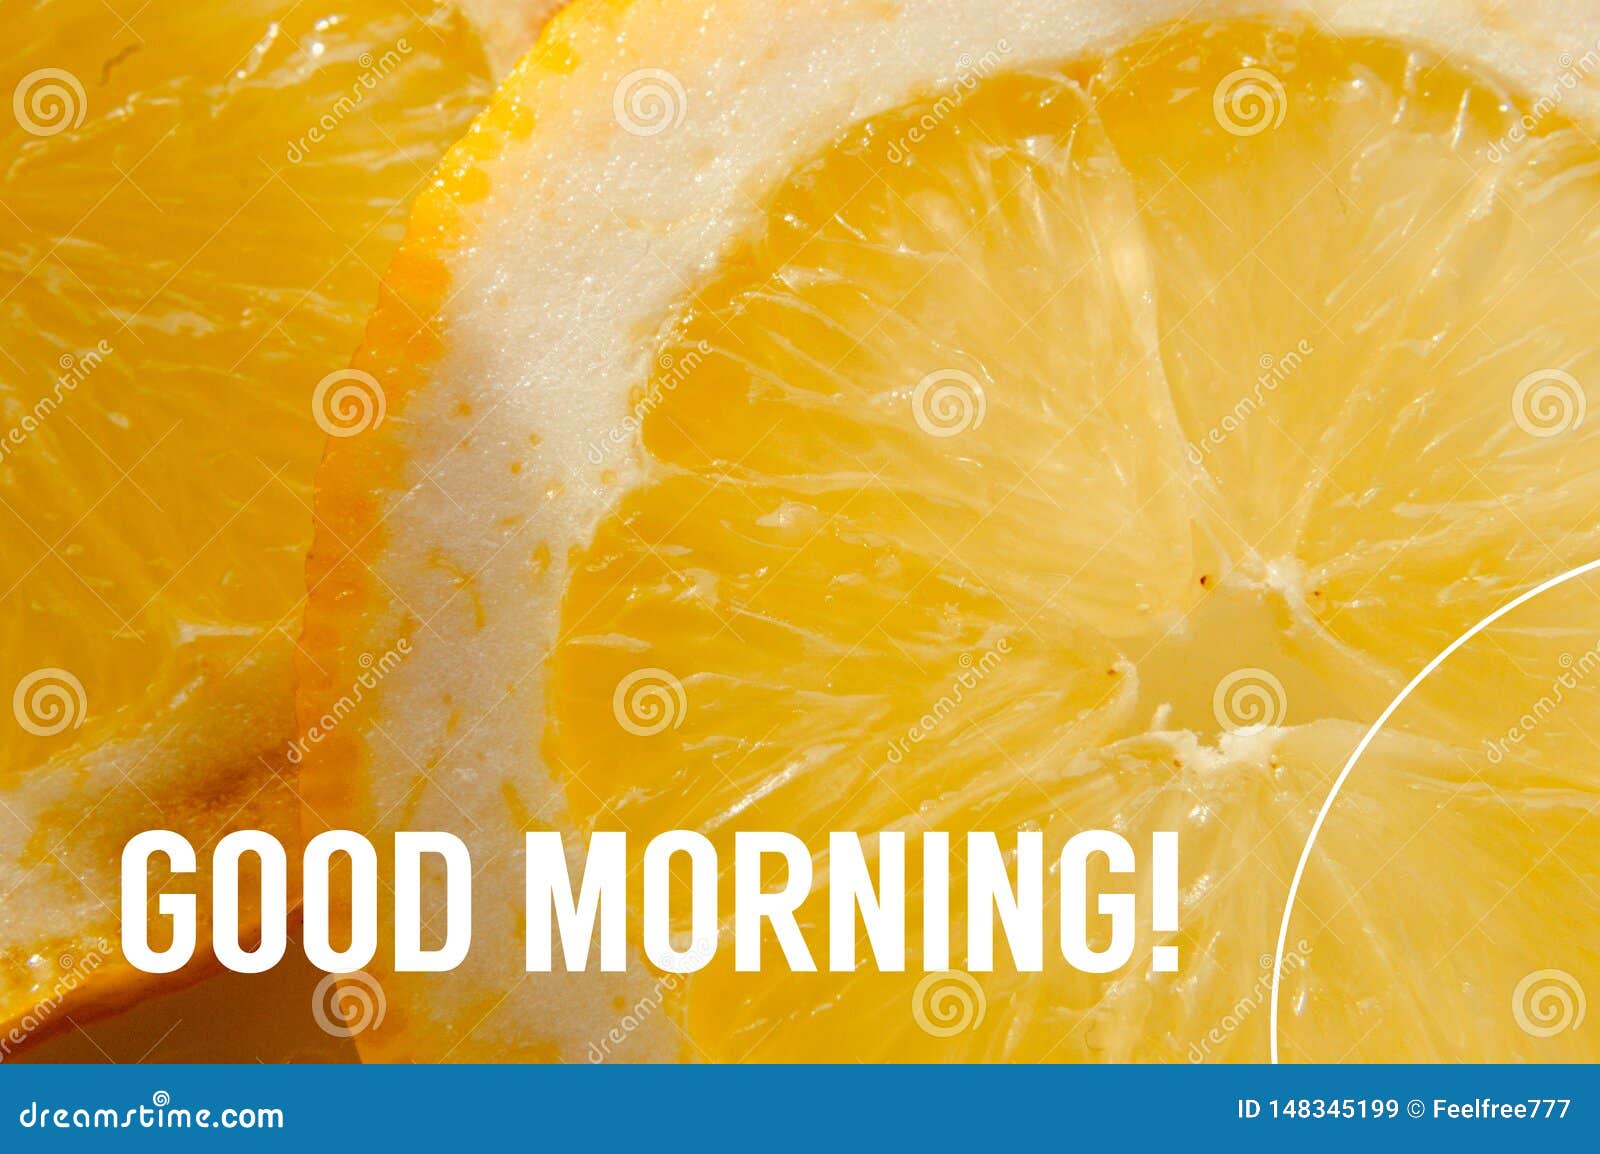 Good Morning Quote Super Quality Abstract Business Picture Stock ...